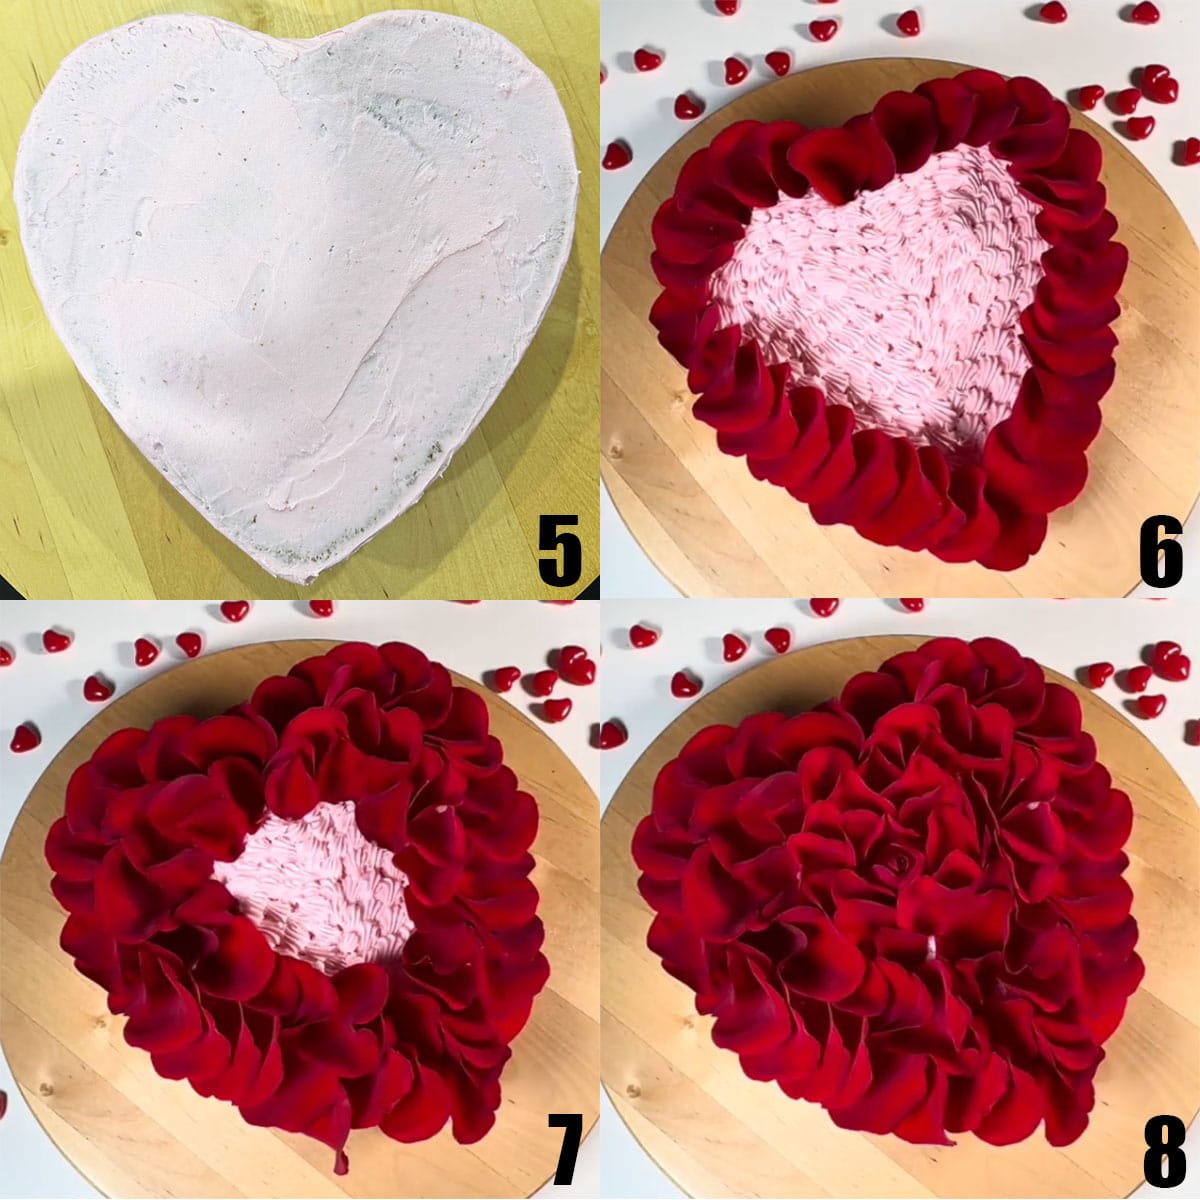 Collage Image With Step by Step Process Shots on How to Decorate Cake With Fresh Flower Petals. 